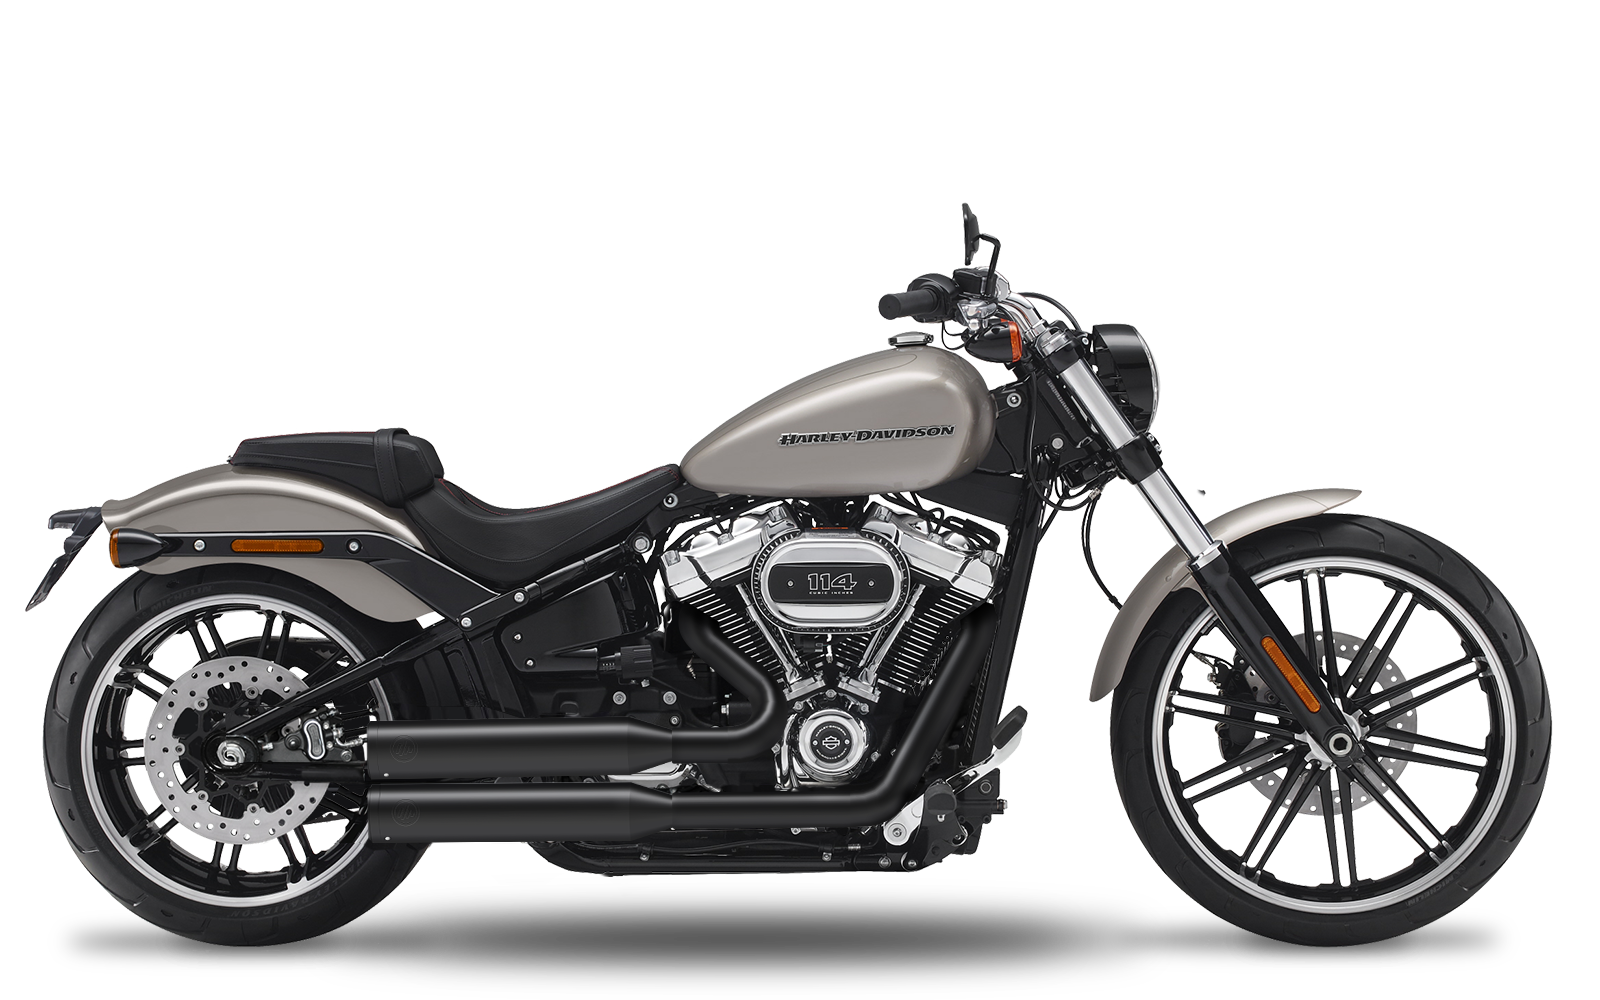 CRUISER/SOFTAIL - Breakout - ME107 - 2018-2019 - Complete systems adjustable